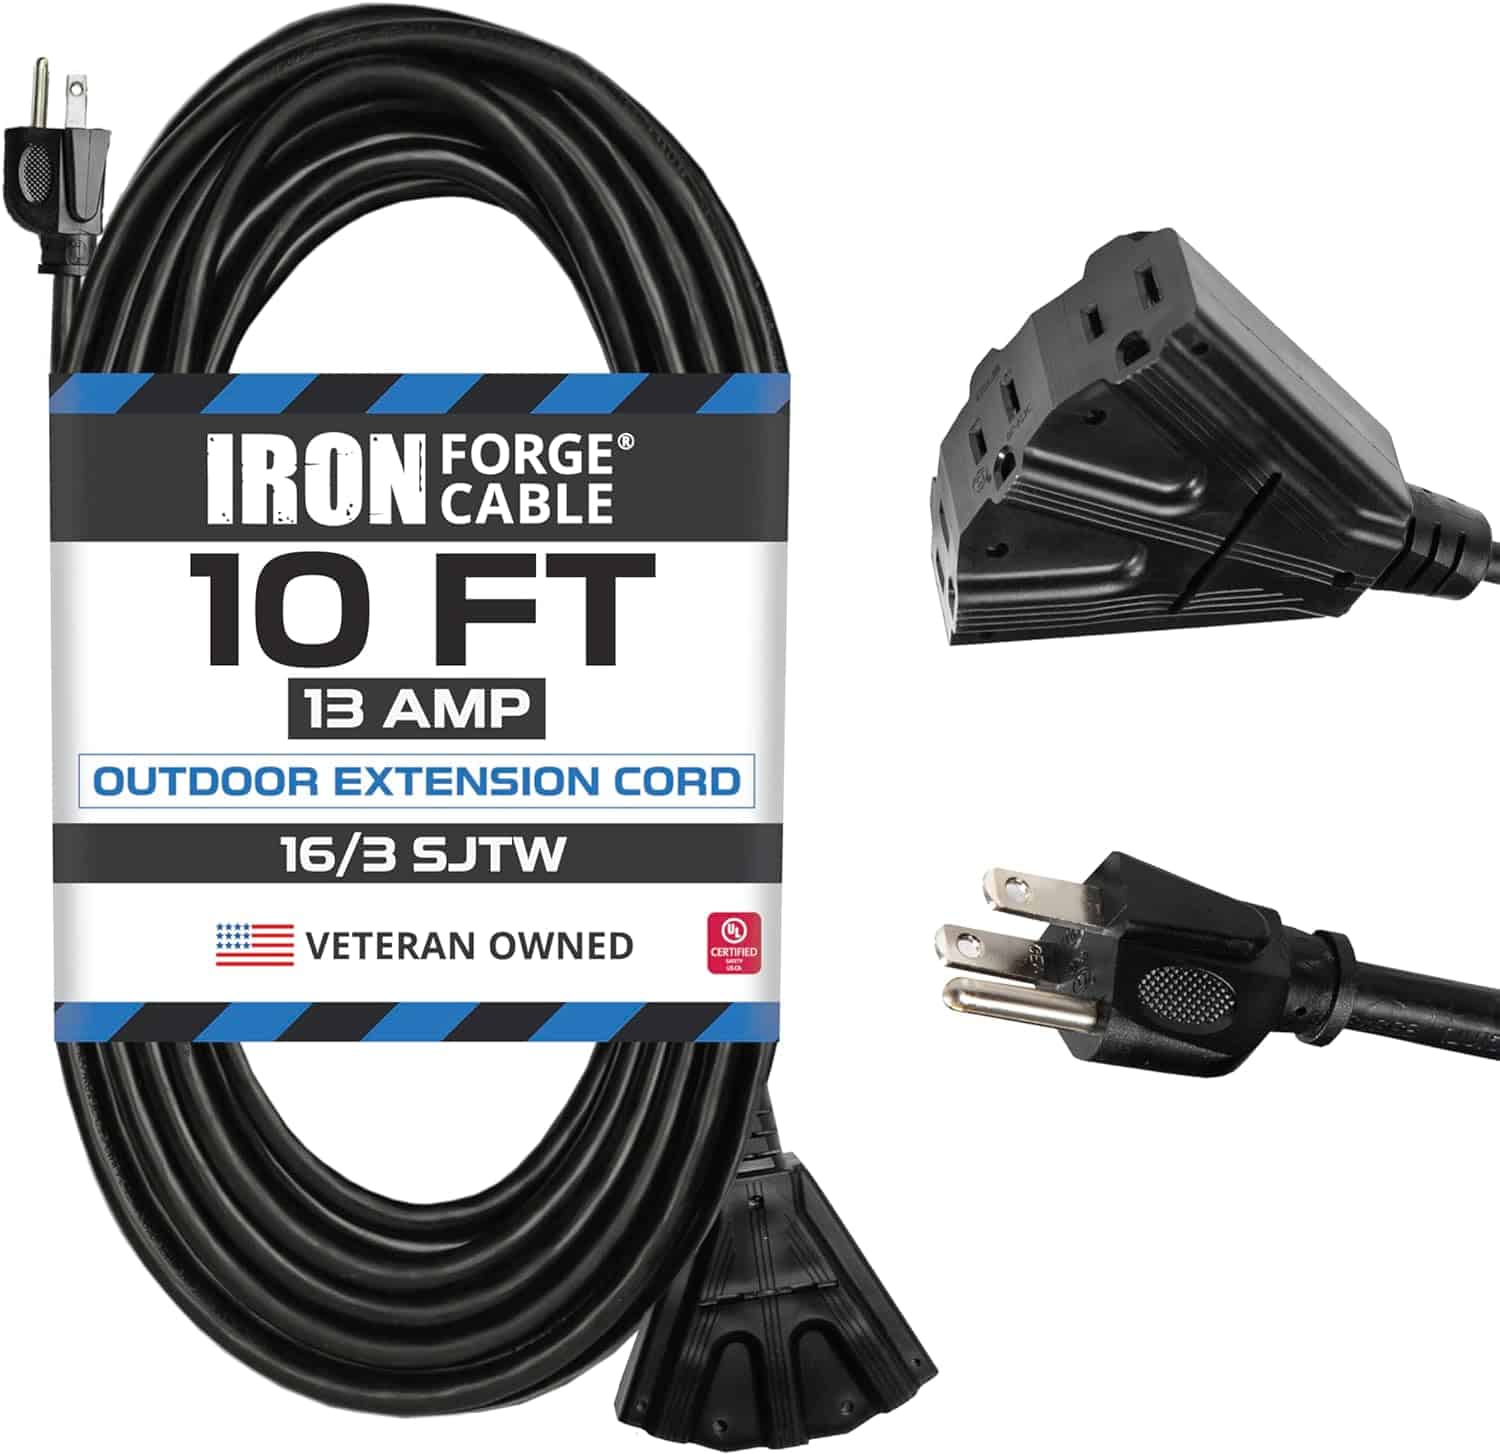 Iron-Forge-Cable-10-Ft-Black-Extension-Cord-with-3-Outlet-16-3-Weatherproof-10-Outdoor-Extension-Cord-Multiple-Outlet-10-Foot-3-Prong-Cable-for-LAN